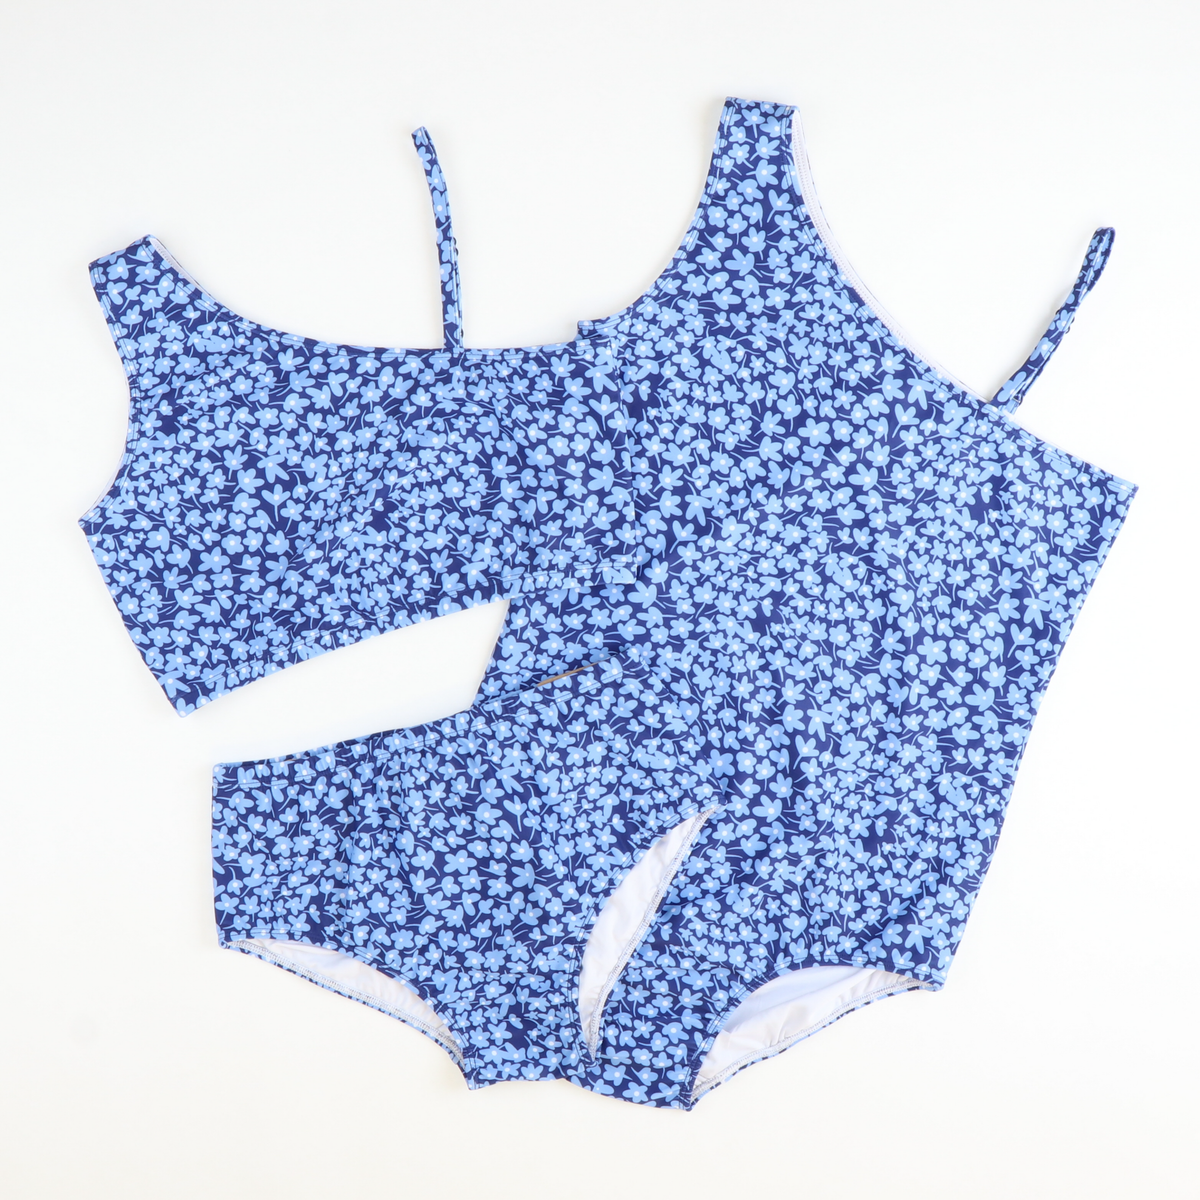 Two-Piece Swimsuit - Blue Mountain Beach Floral